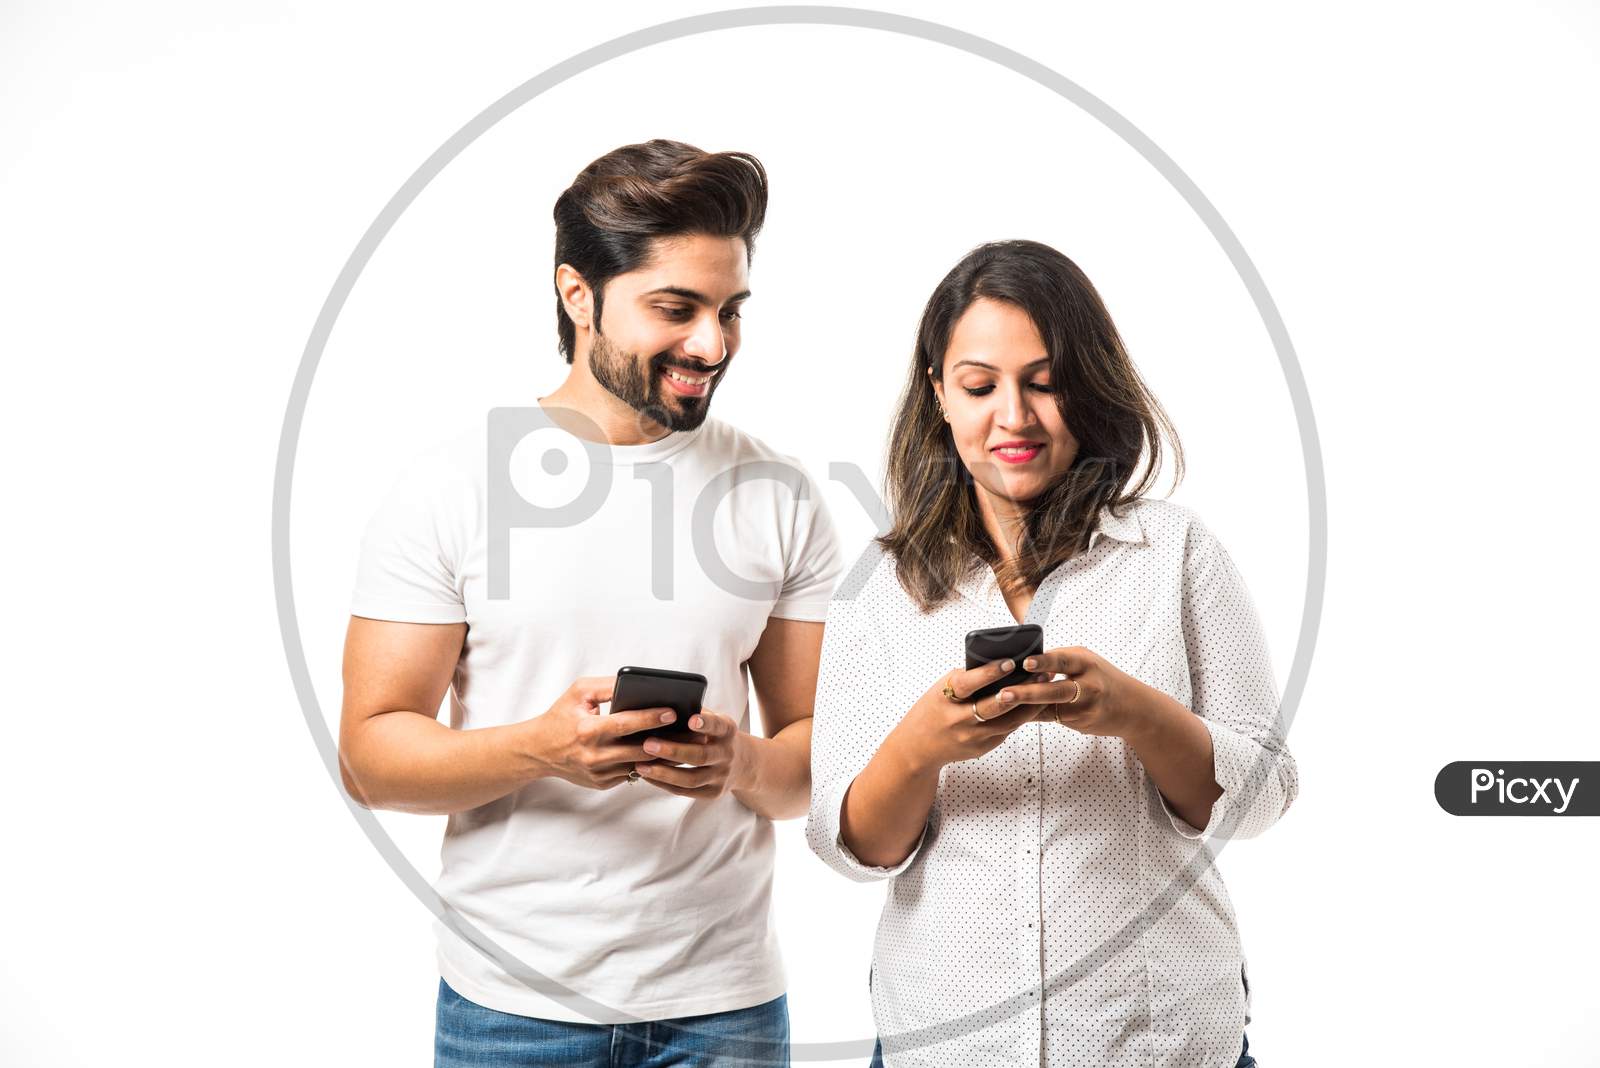 Indian couple using smartphone / mobile handset, standing isolated over white background